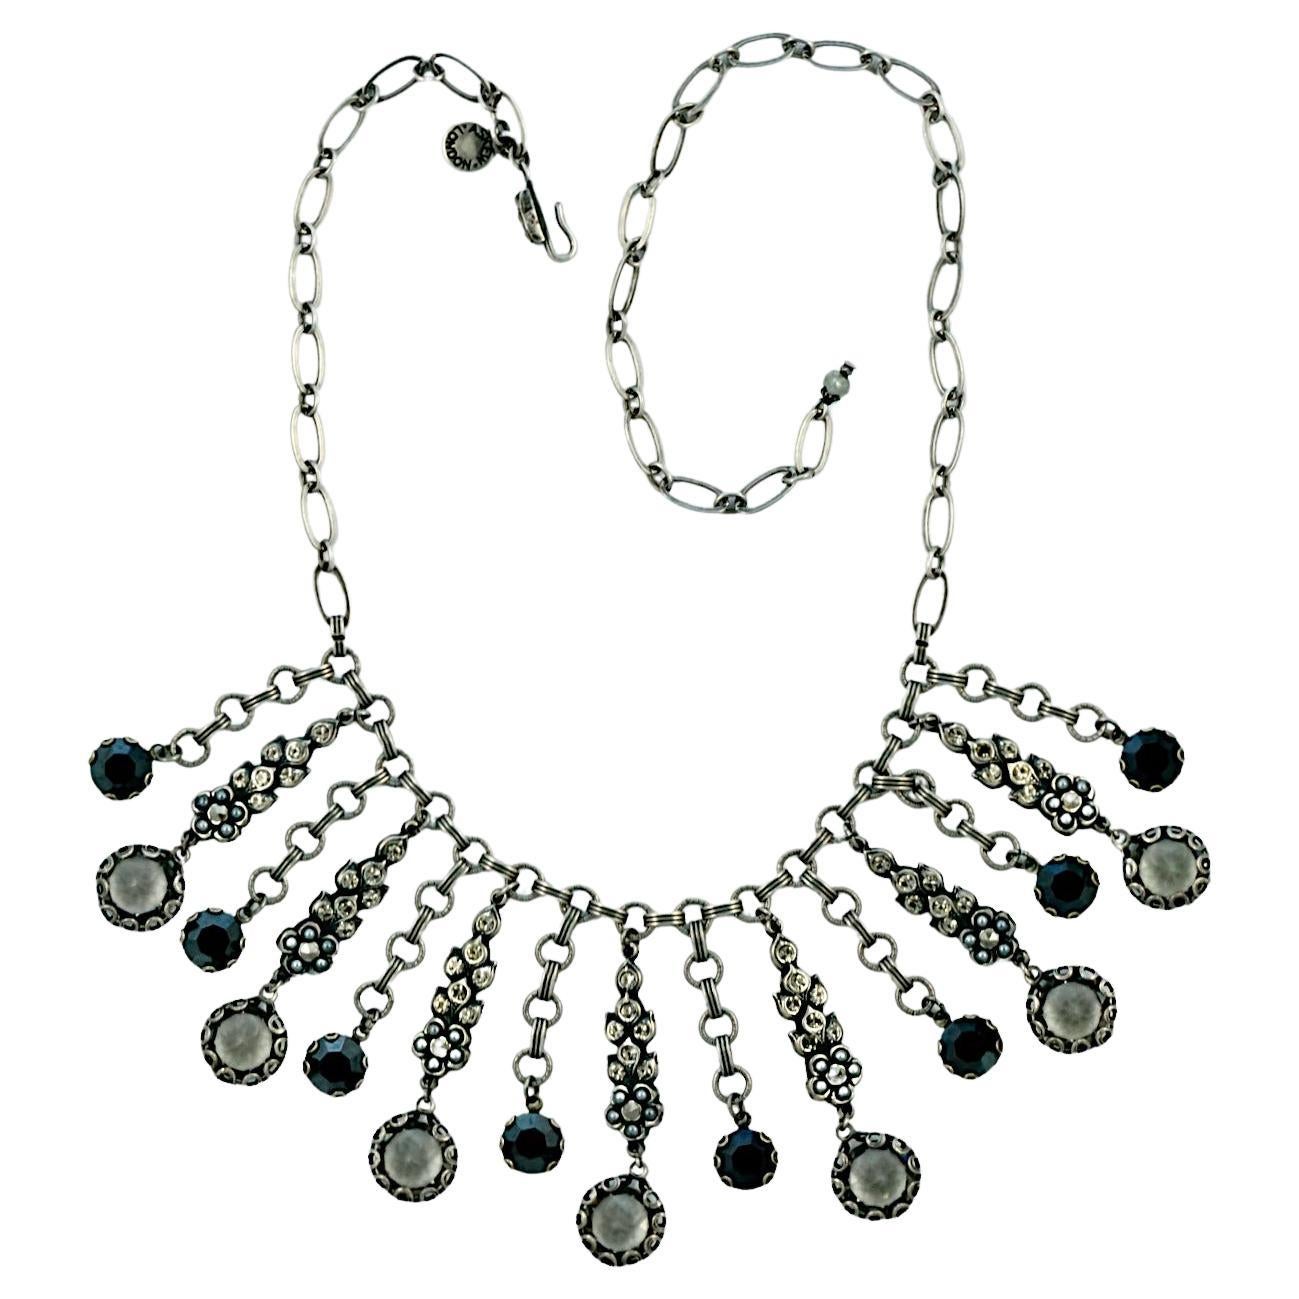 Askew London Antiqued Silver Tone Drop Necklace Marcasites Rhinestones Pearls For Sale